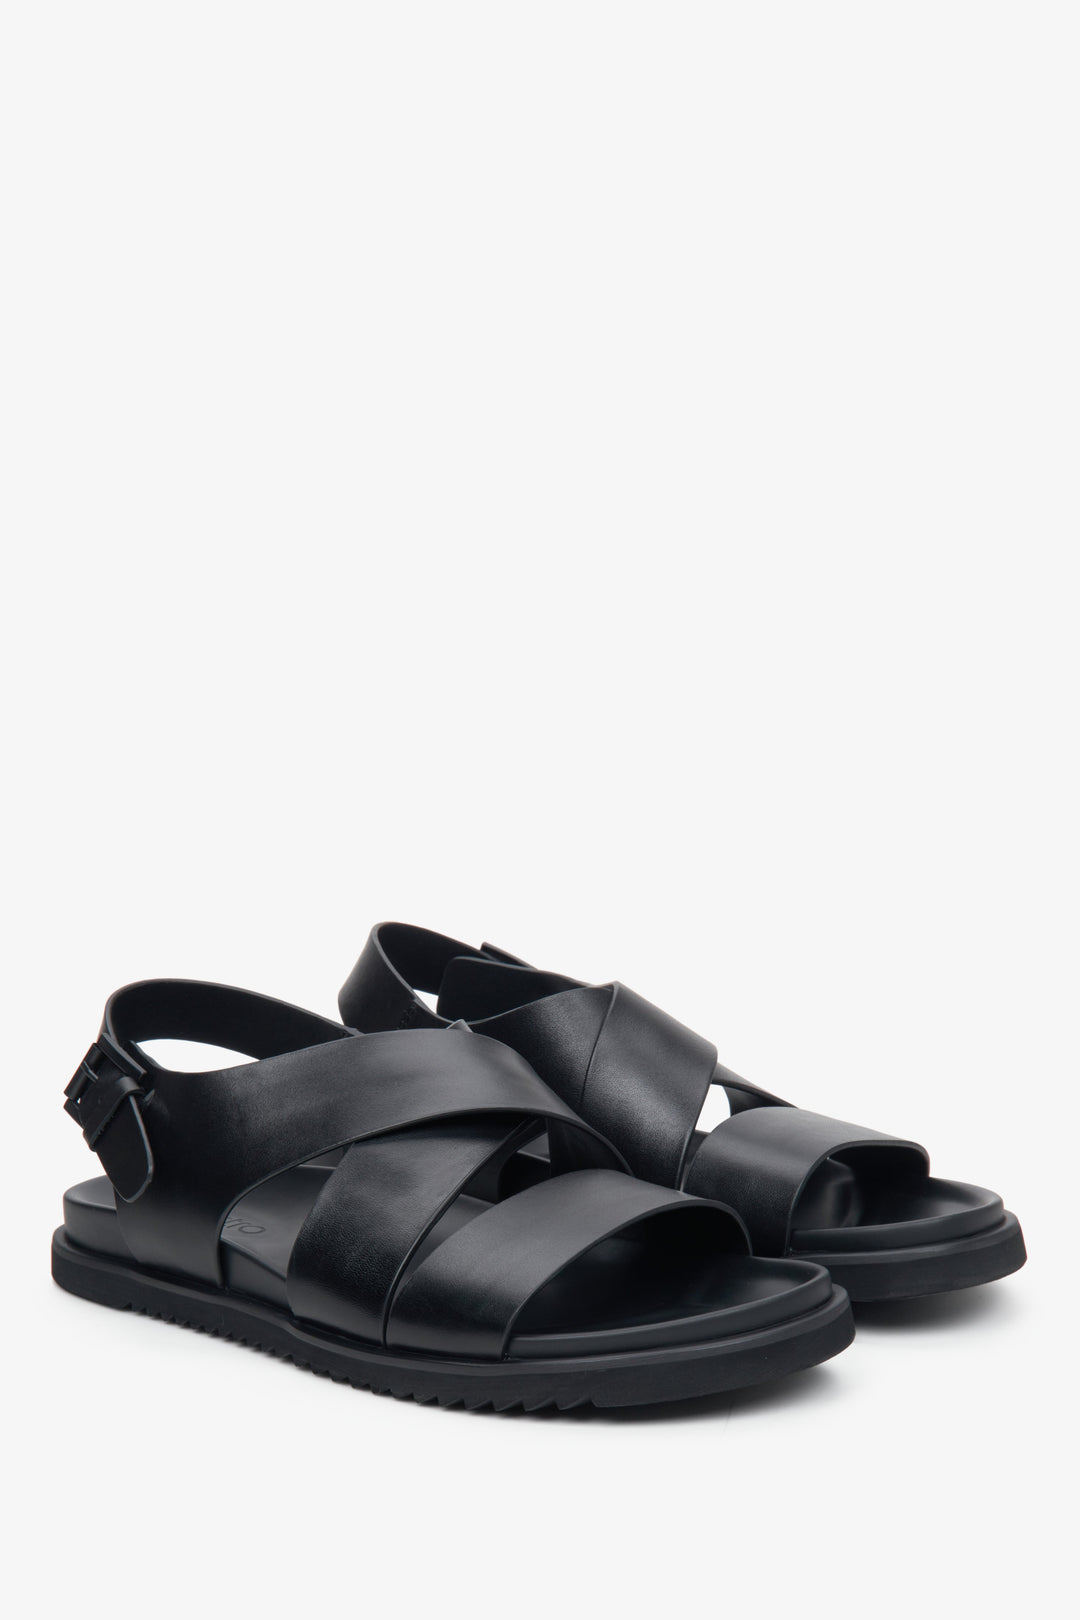 Men's black sandals with thick, crisscrossed straps for summer, by Estro.